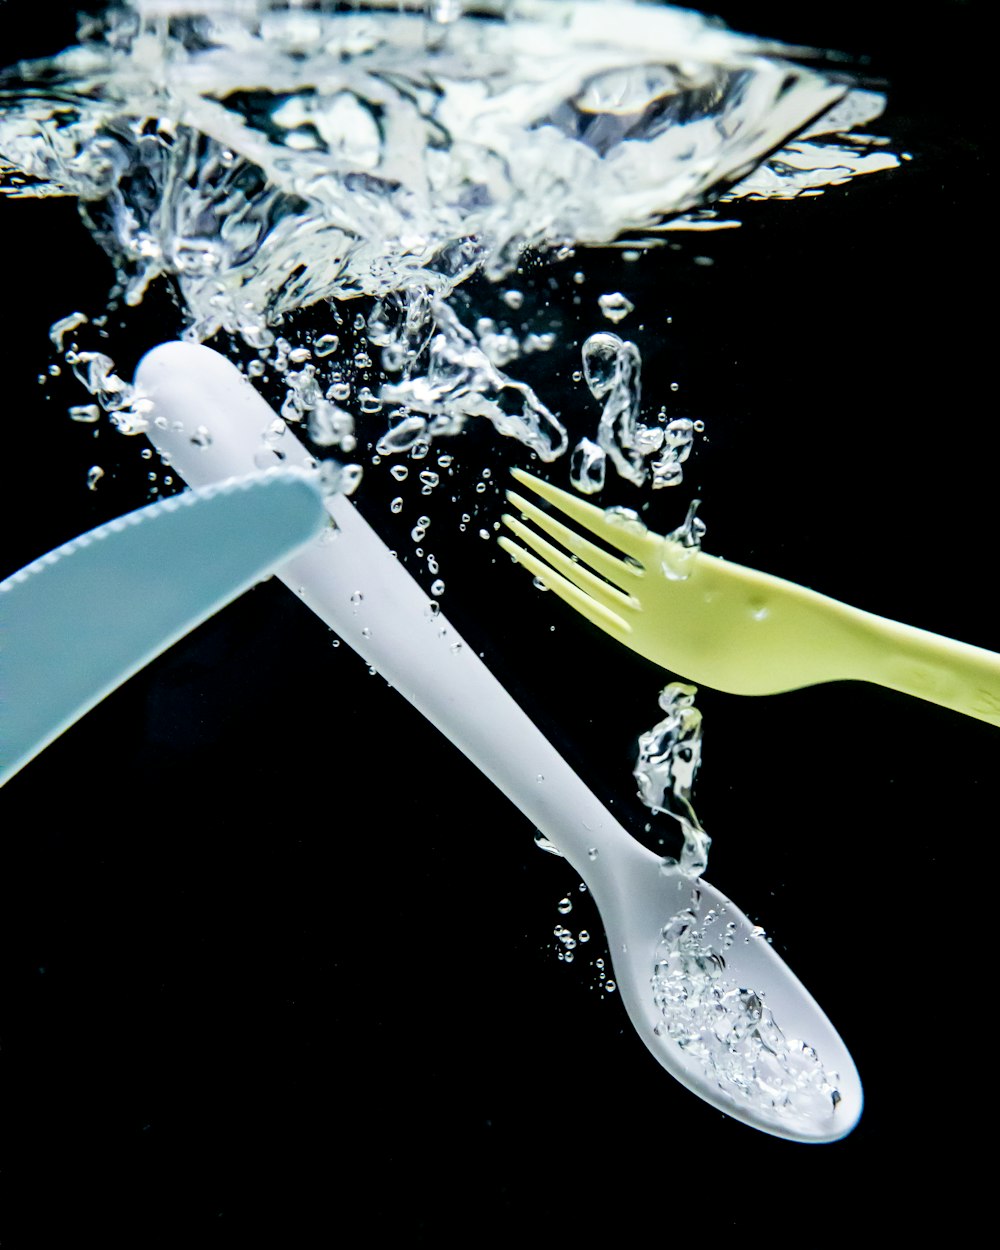 yellow handled fork on white ice